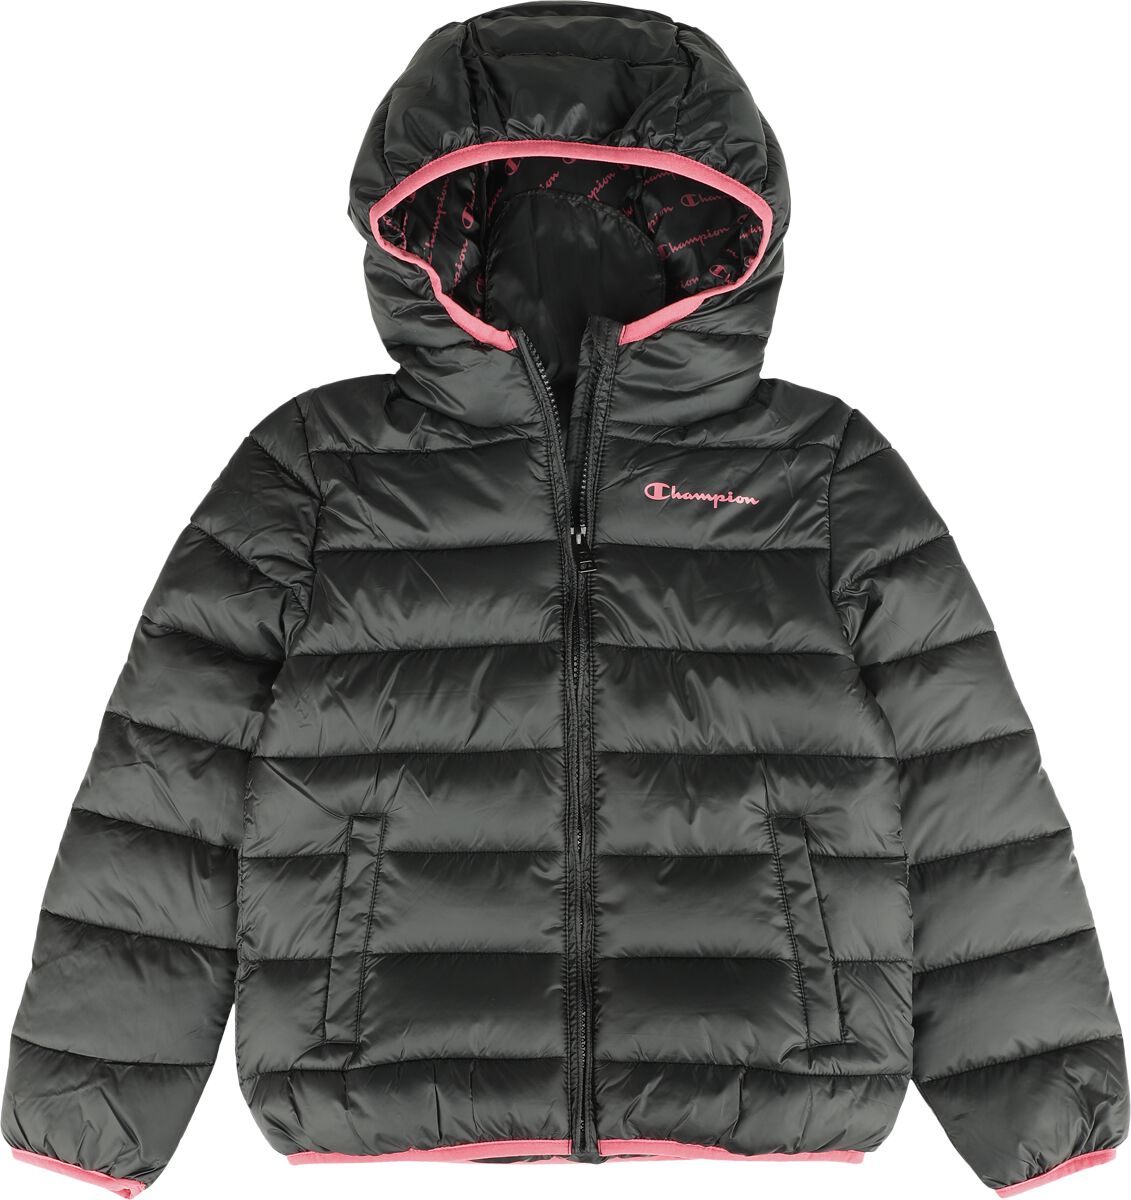 Image of Giacca di Champion - Legacy outdoor hooded jacket - 122/128 a 170/176 - ragazze - nero/rosa